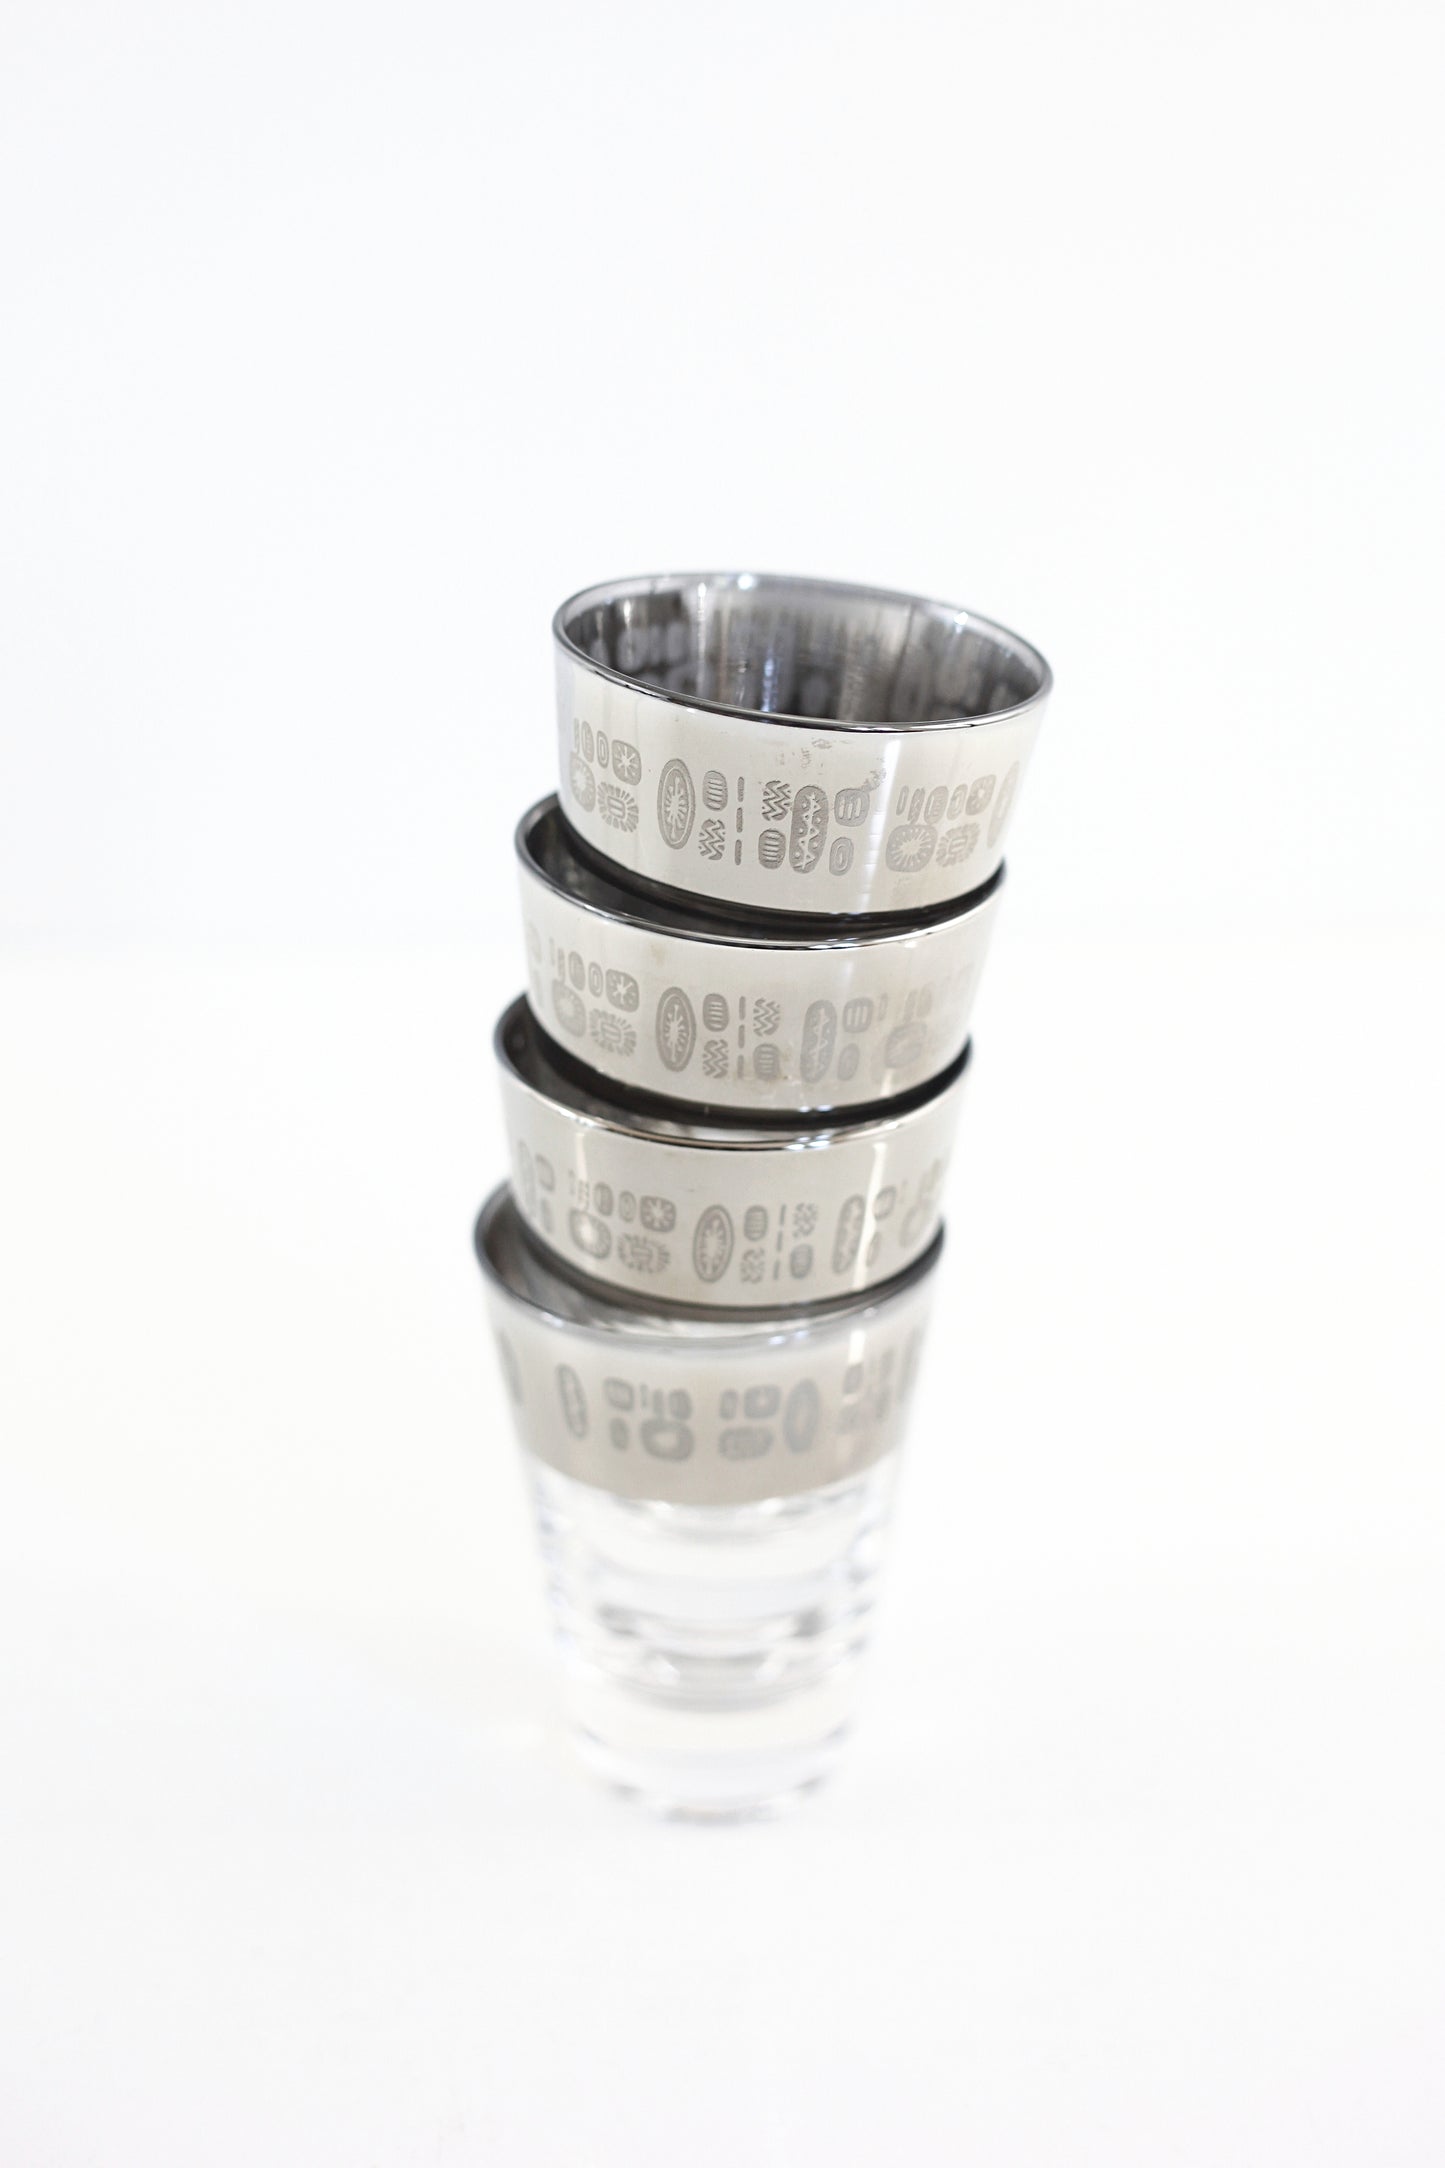 SOLD - Mid Century Modern Temporama Silver Band Cocktail Glasses